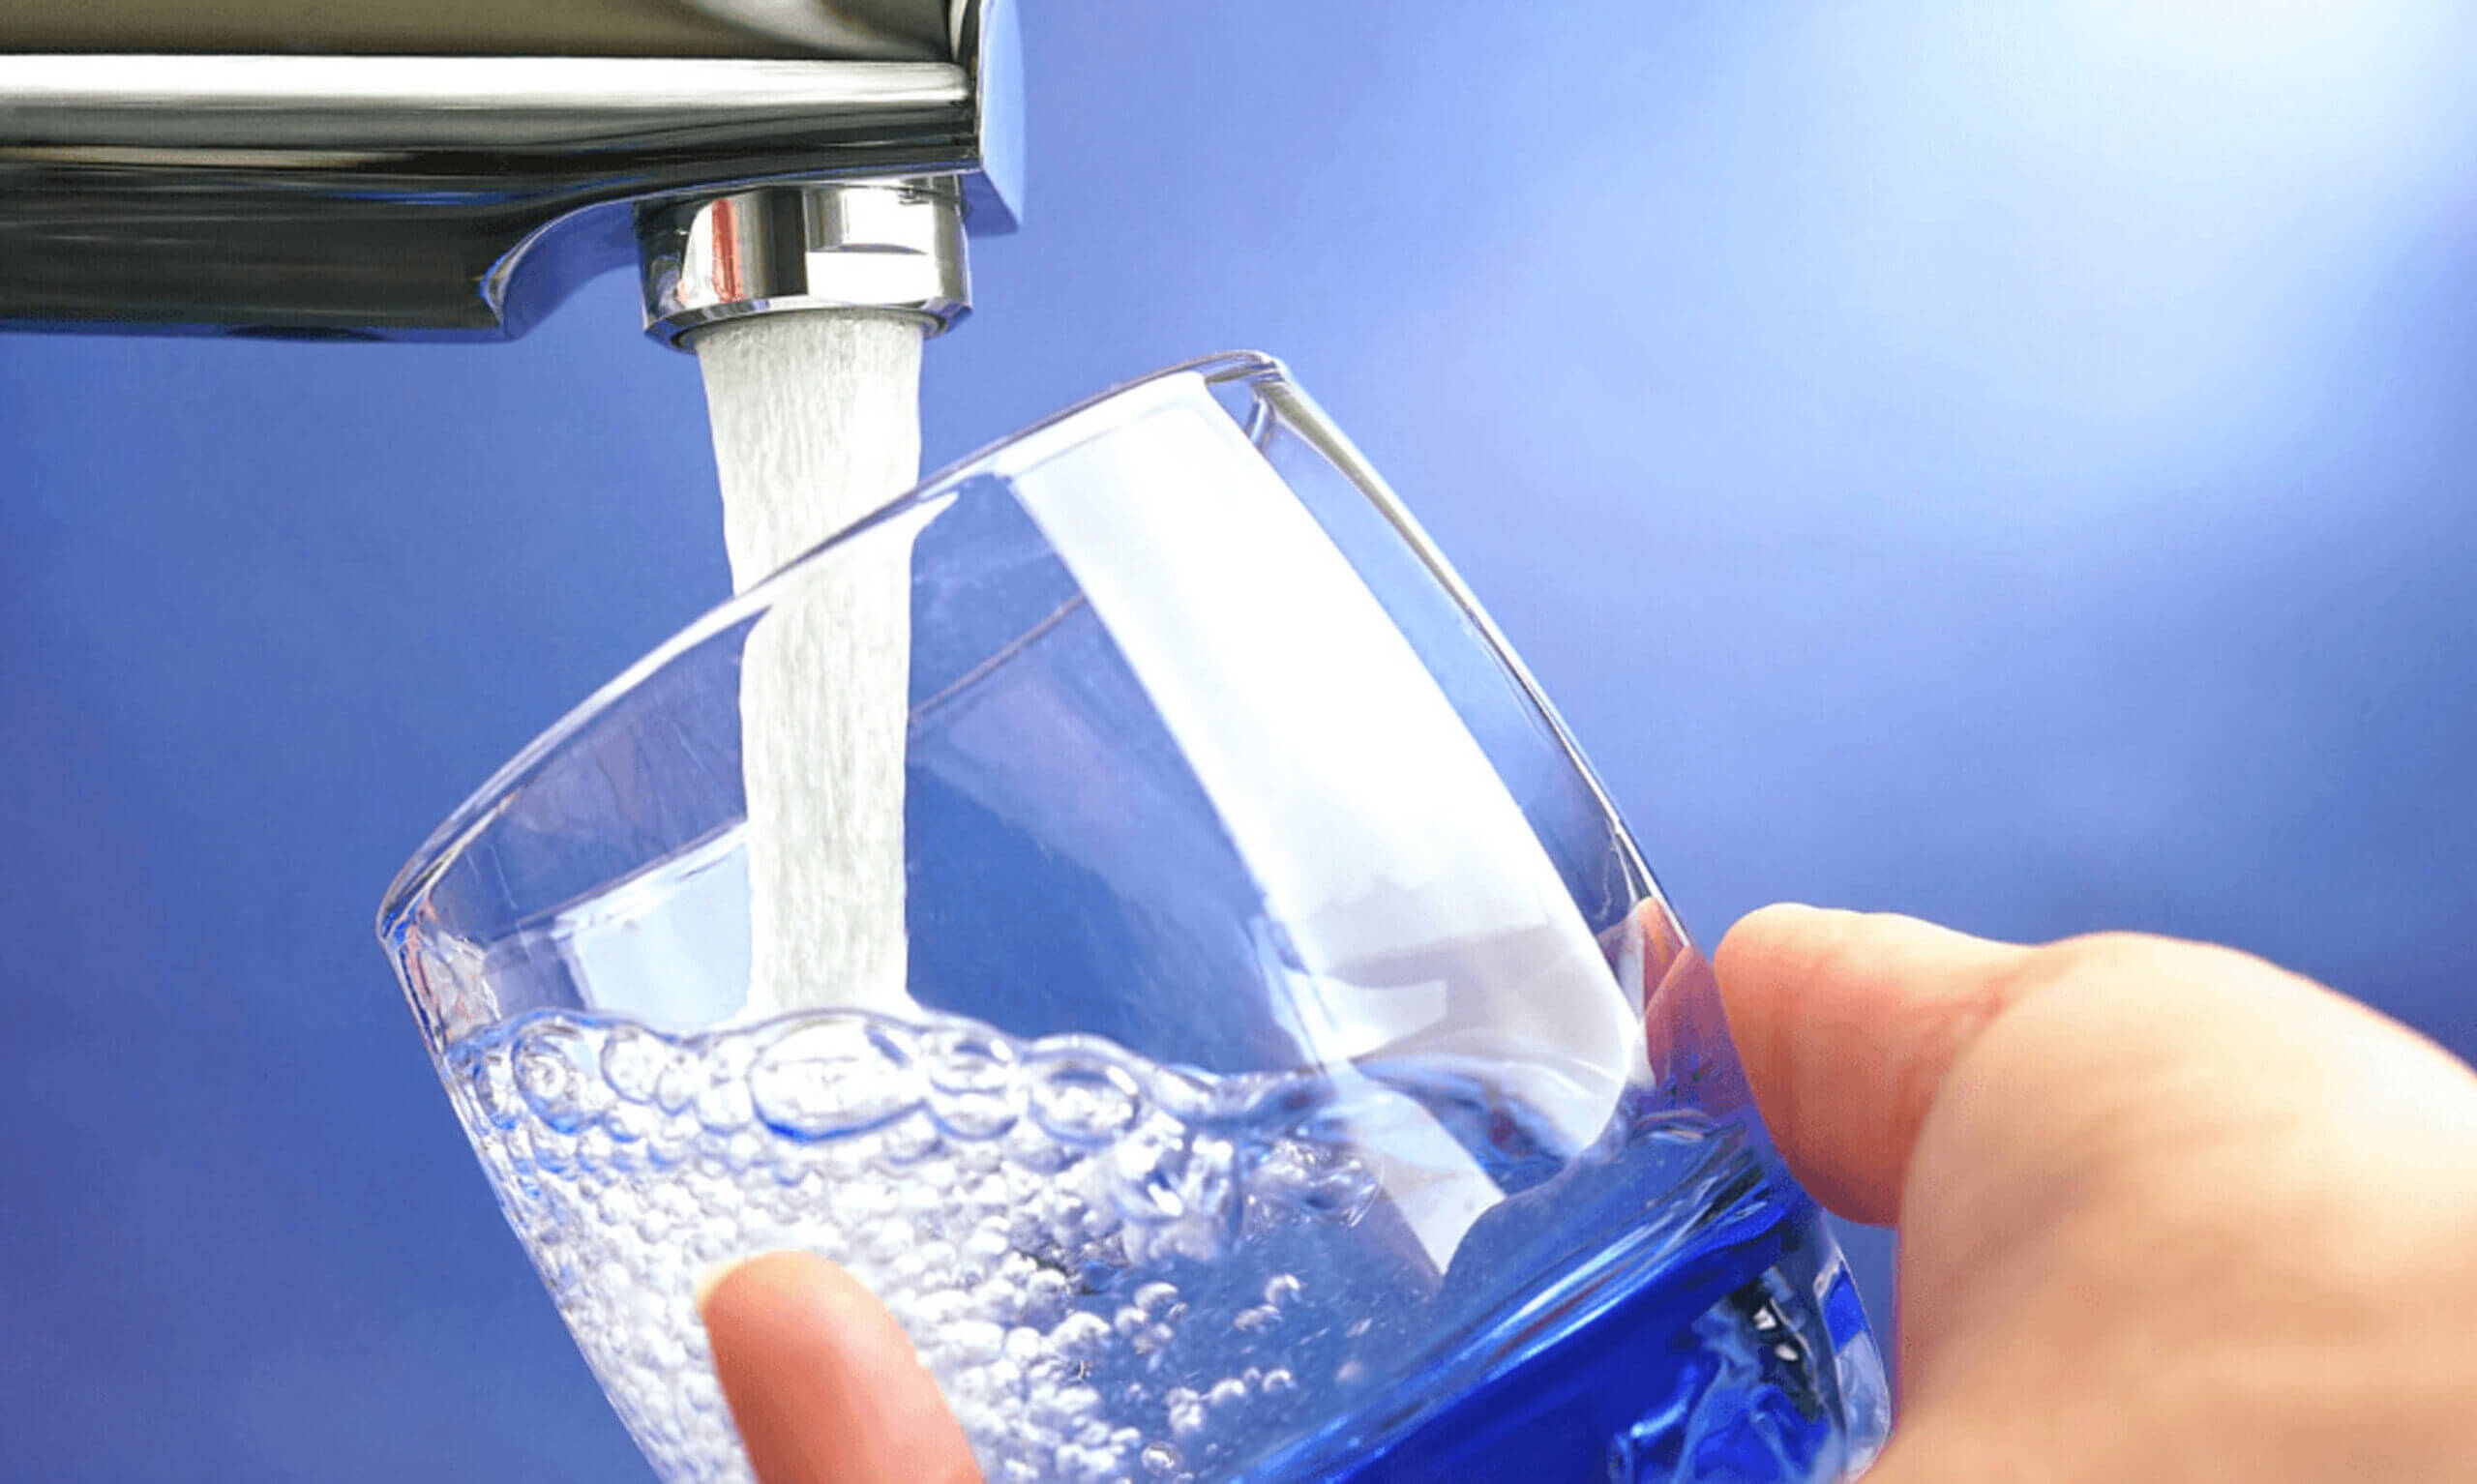 10 Benefits of Drinking Tap Water vs Bottled Water